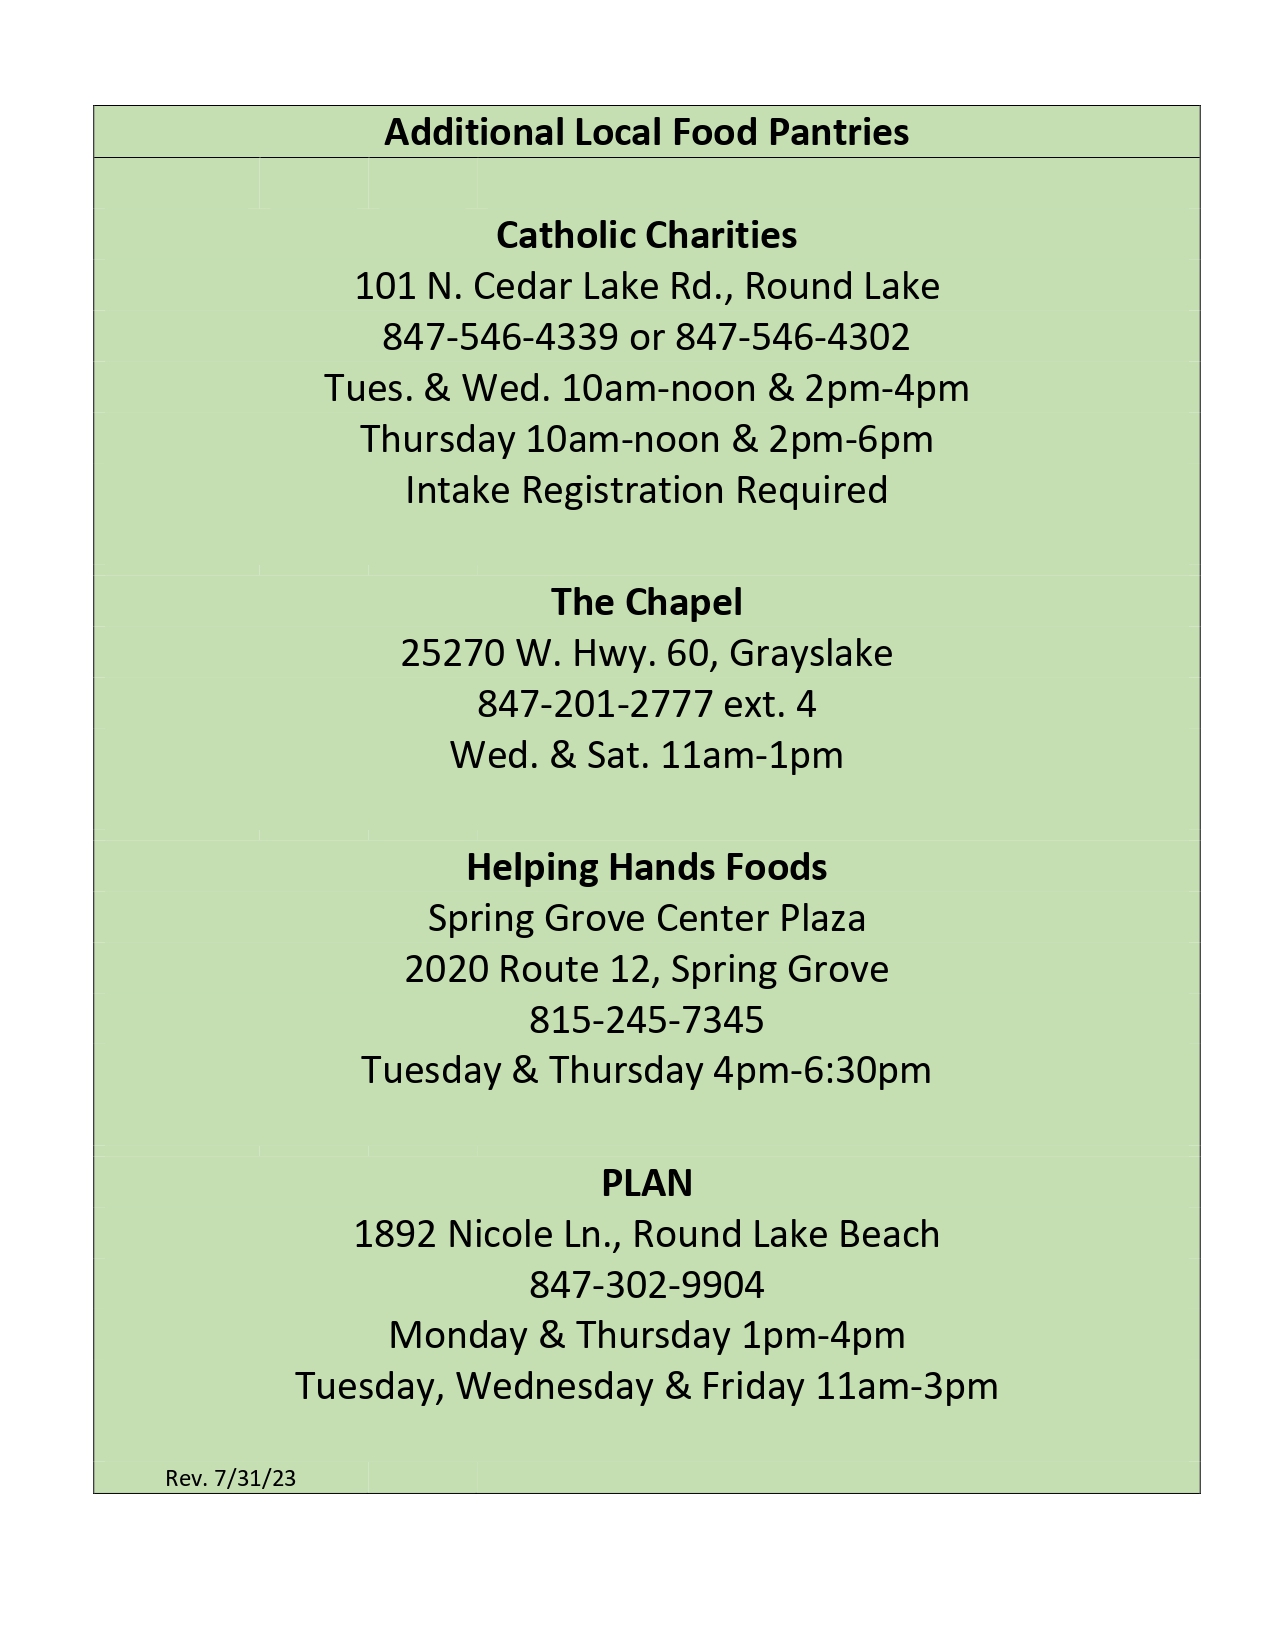 Image displaying a list of local food pantries